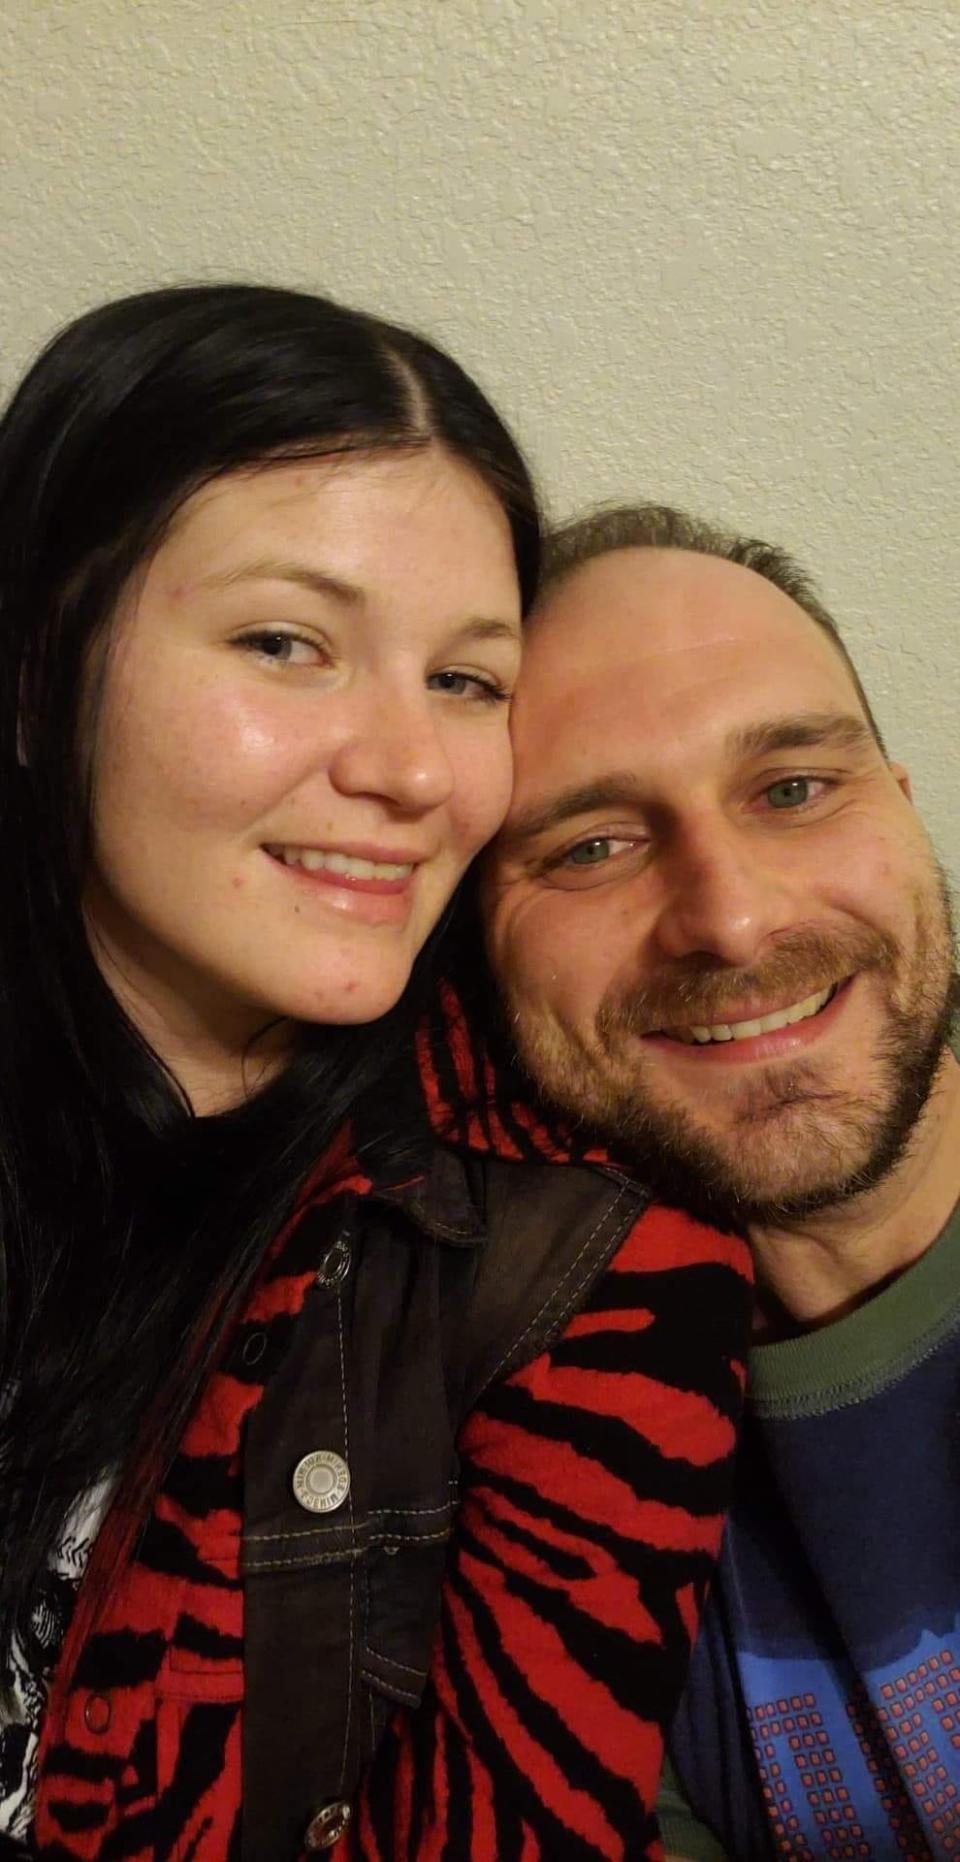 Joshua McLemore is pictured with his girlfriend, Abigail Smith. McLemore, 29, died of multiple organ failure after he was kept in an isolation cell at Jackson County Jail in Brownstown, Indiana for 20 days, according to a federal lawsuit alleging violation of his constitutional rights.